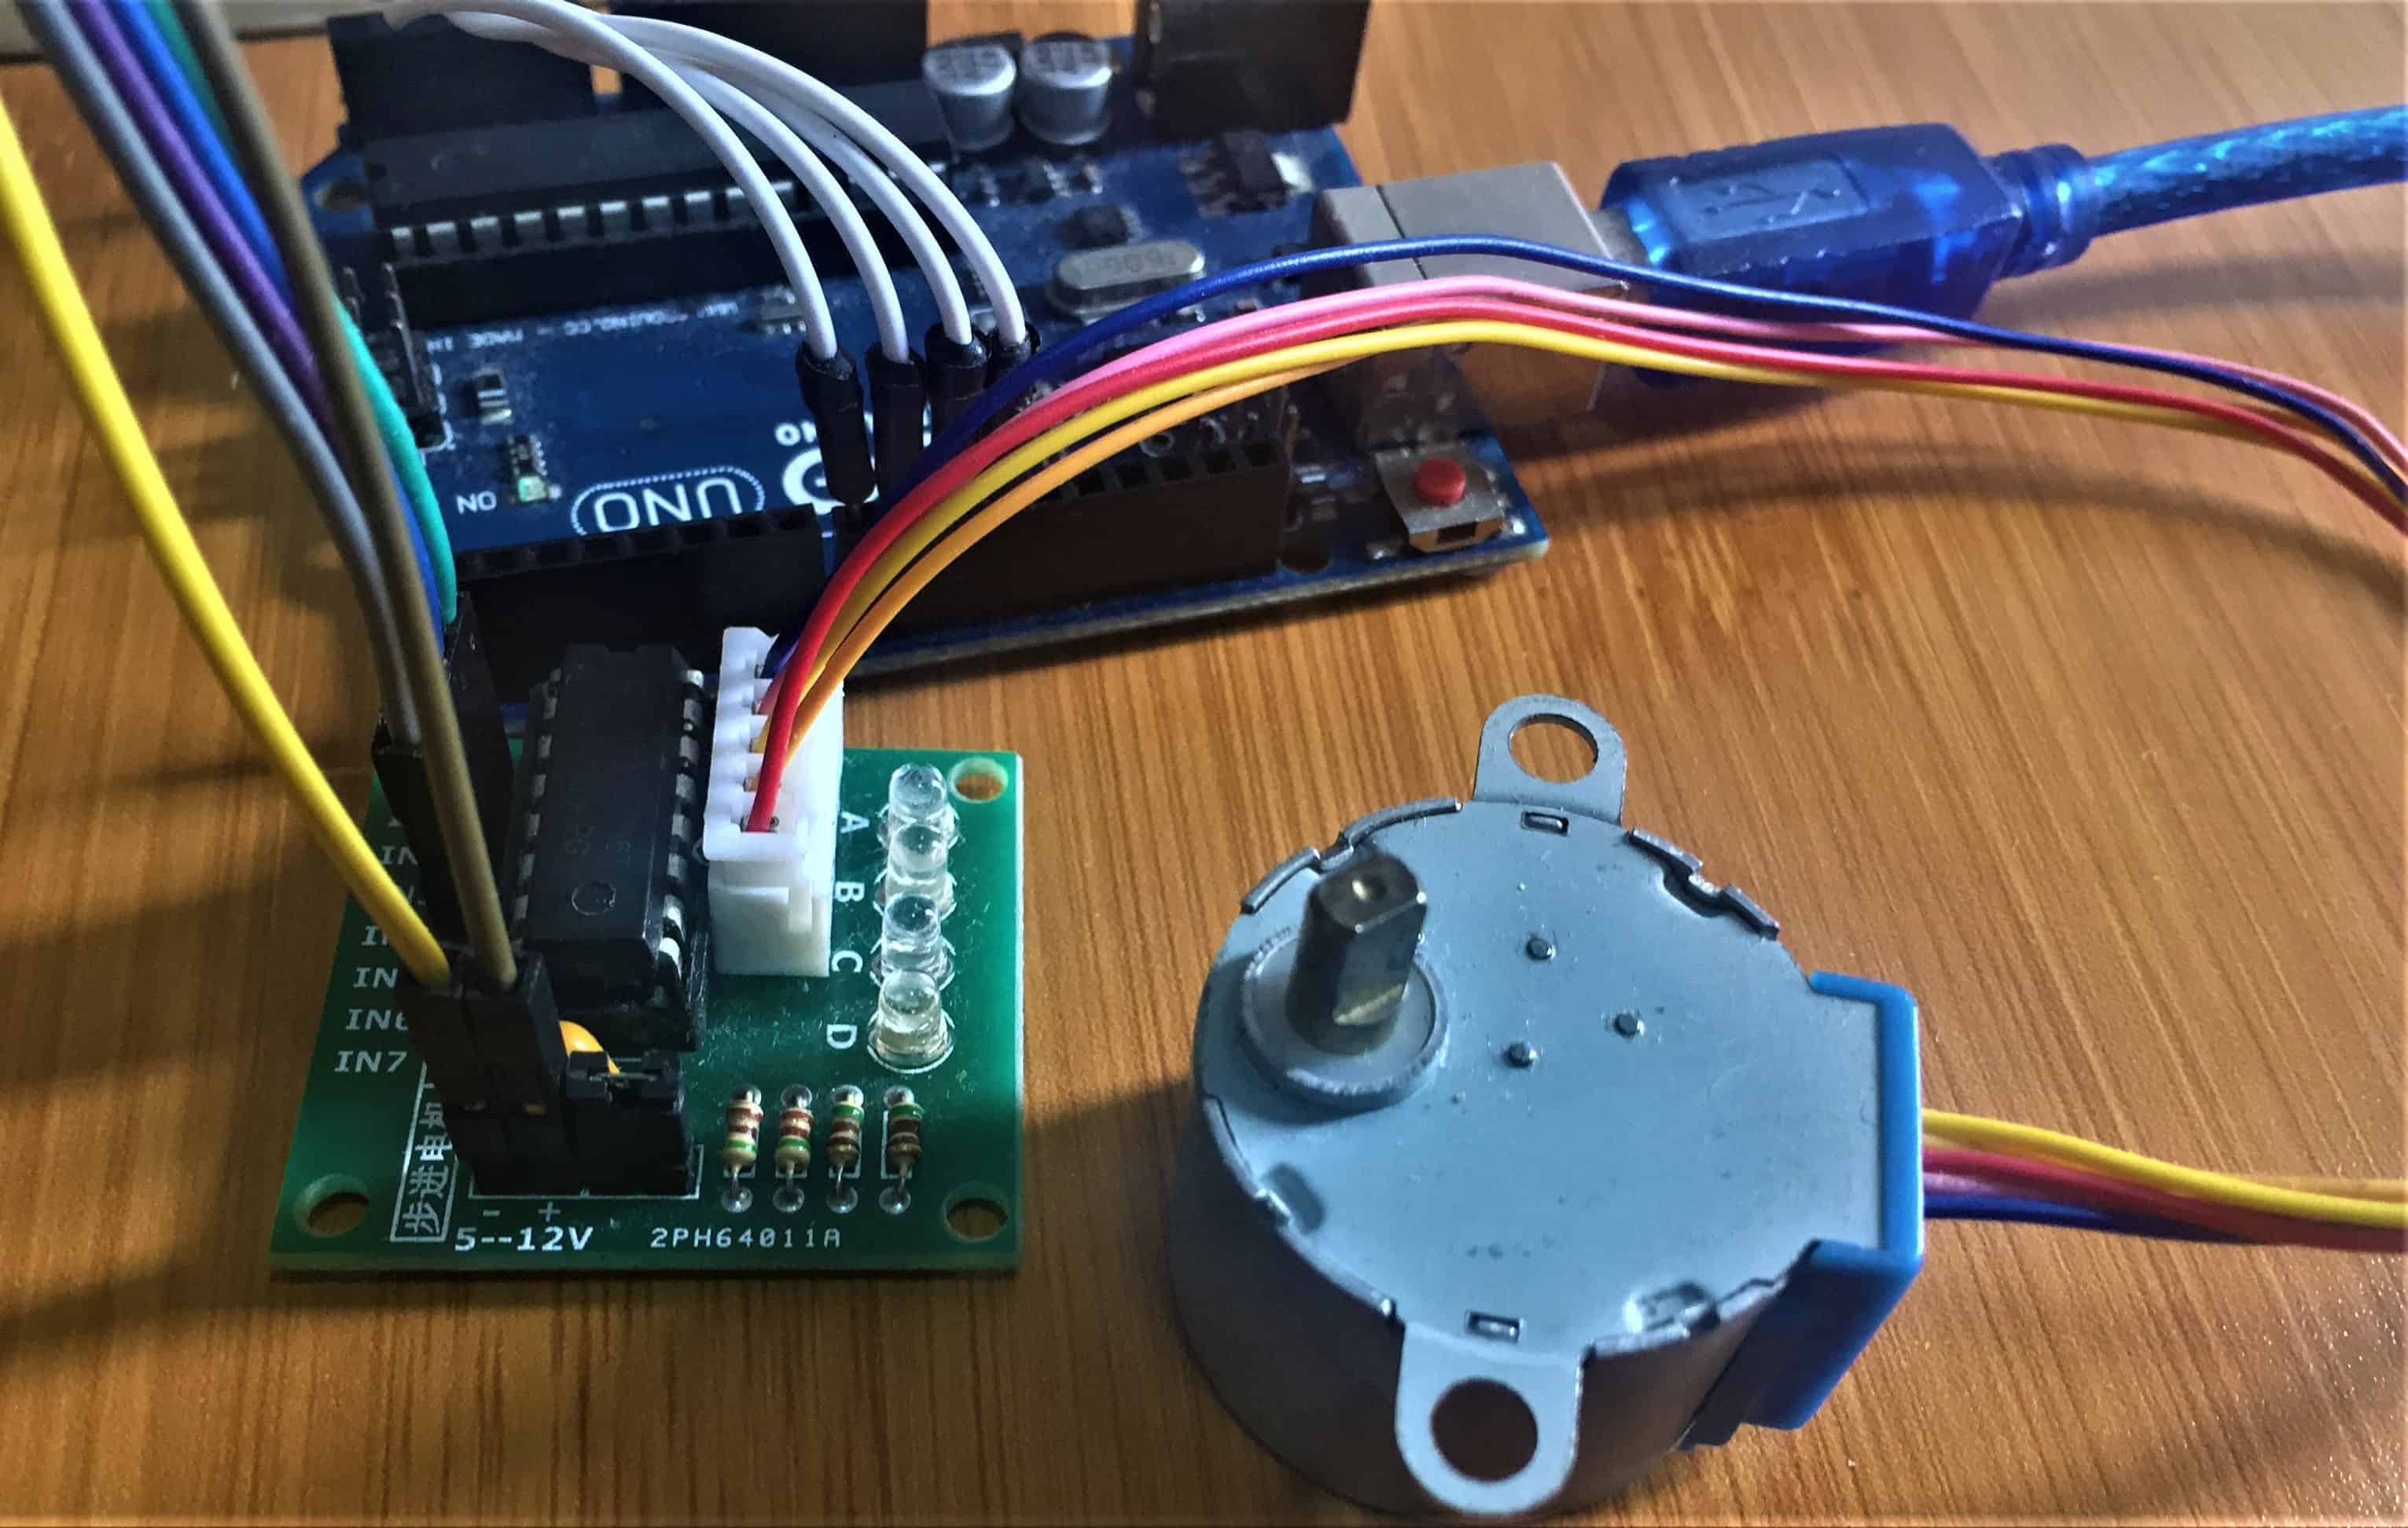 28byj-48 stepper motor with uln2003 driver and arduino